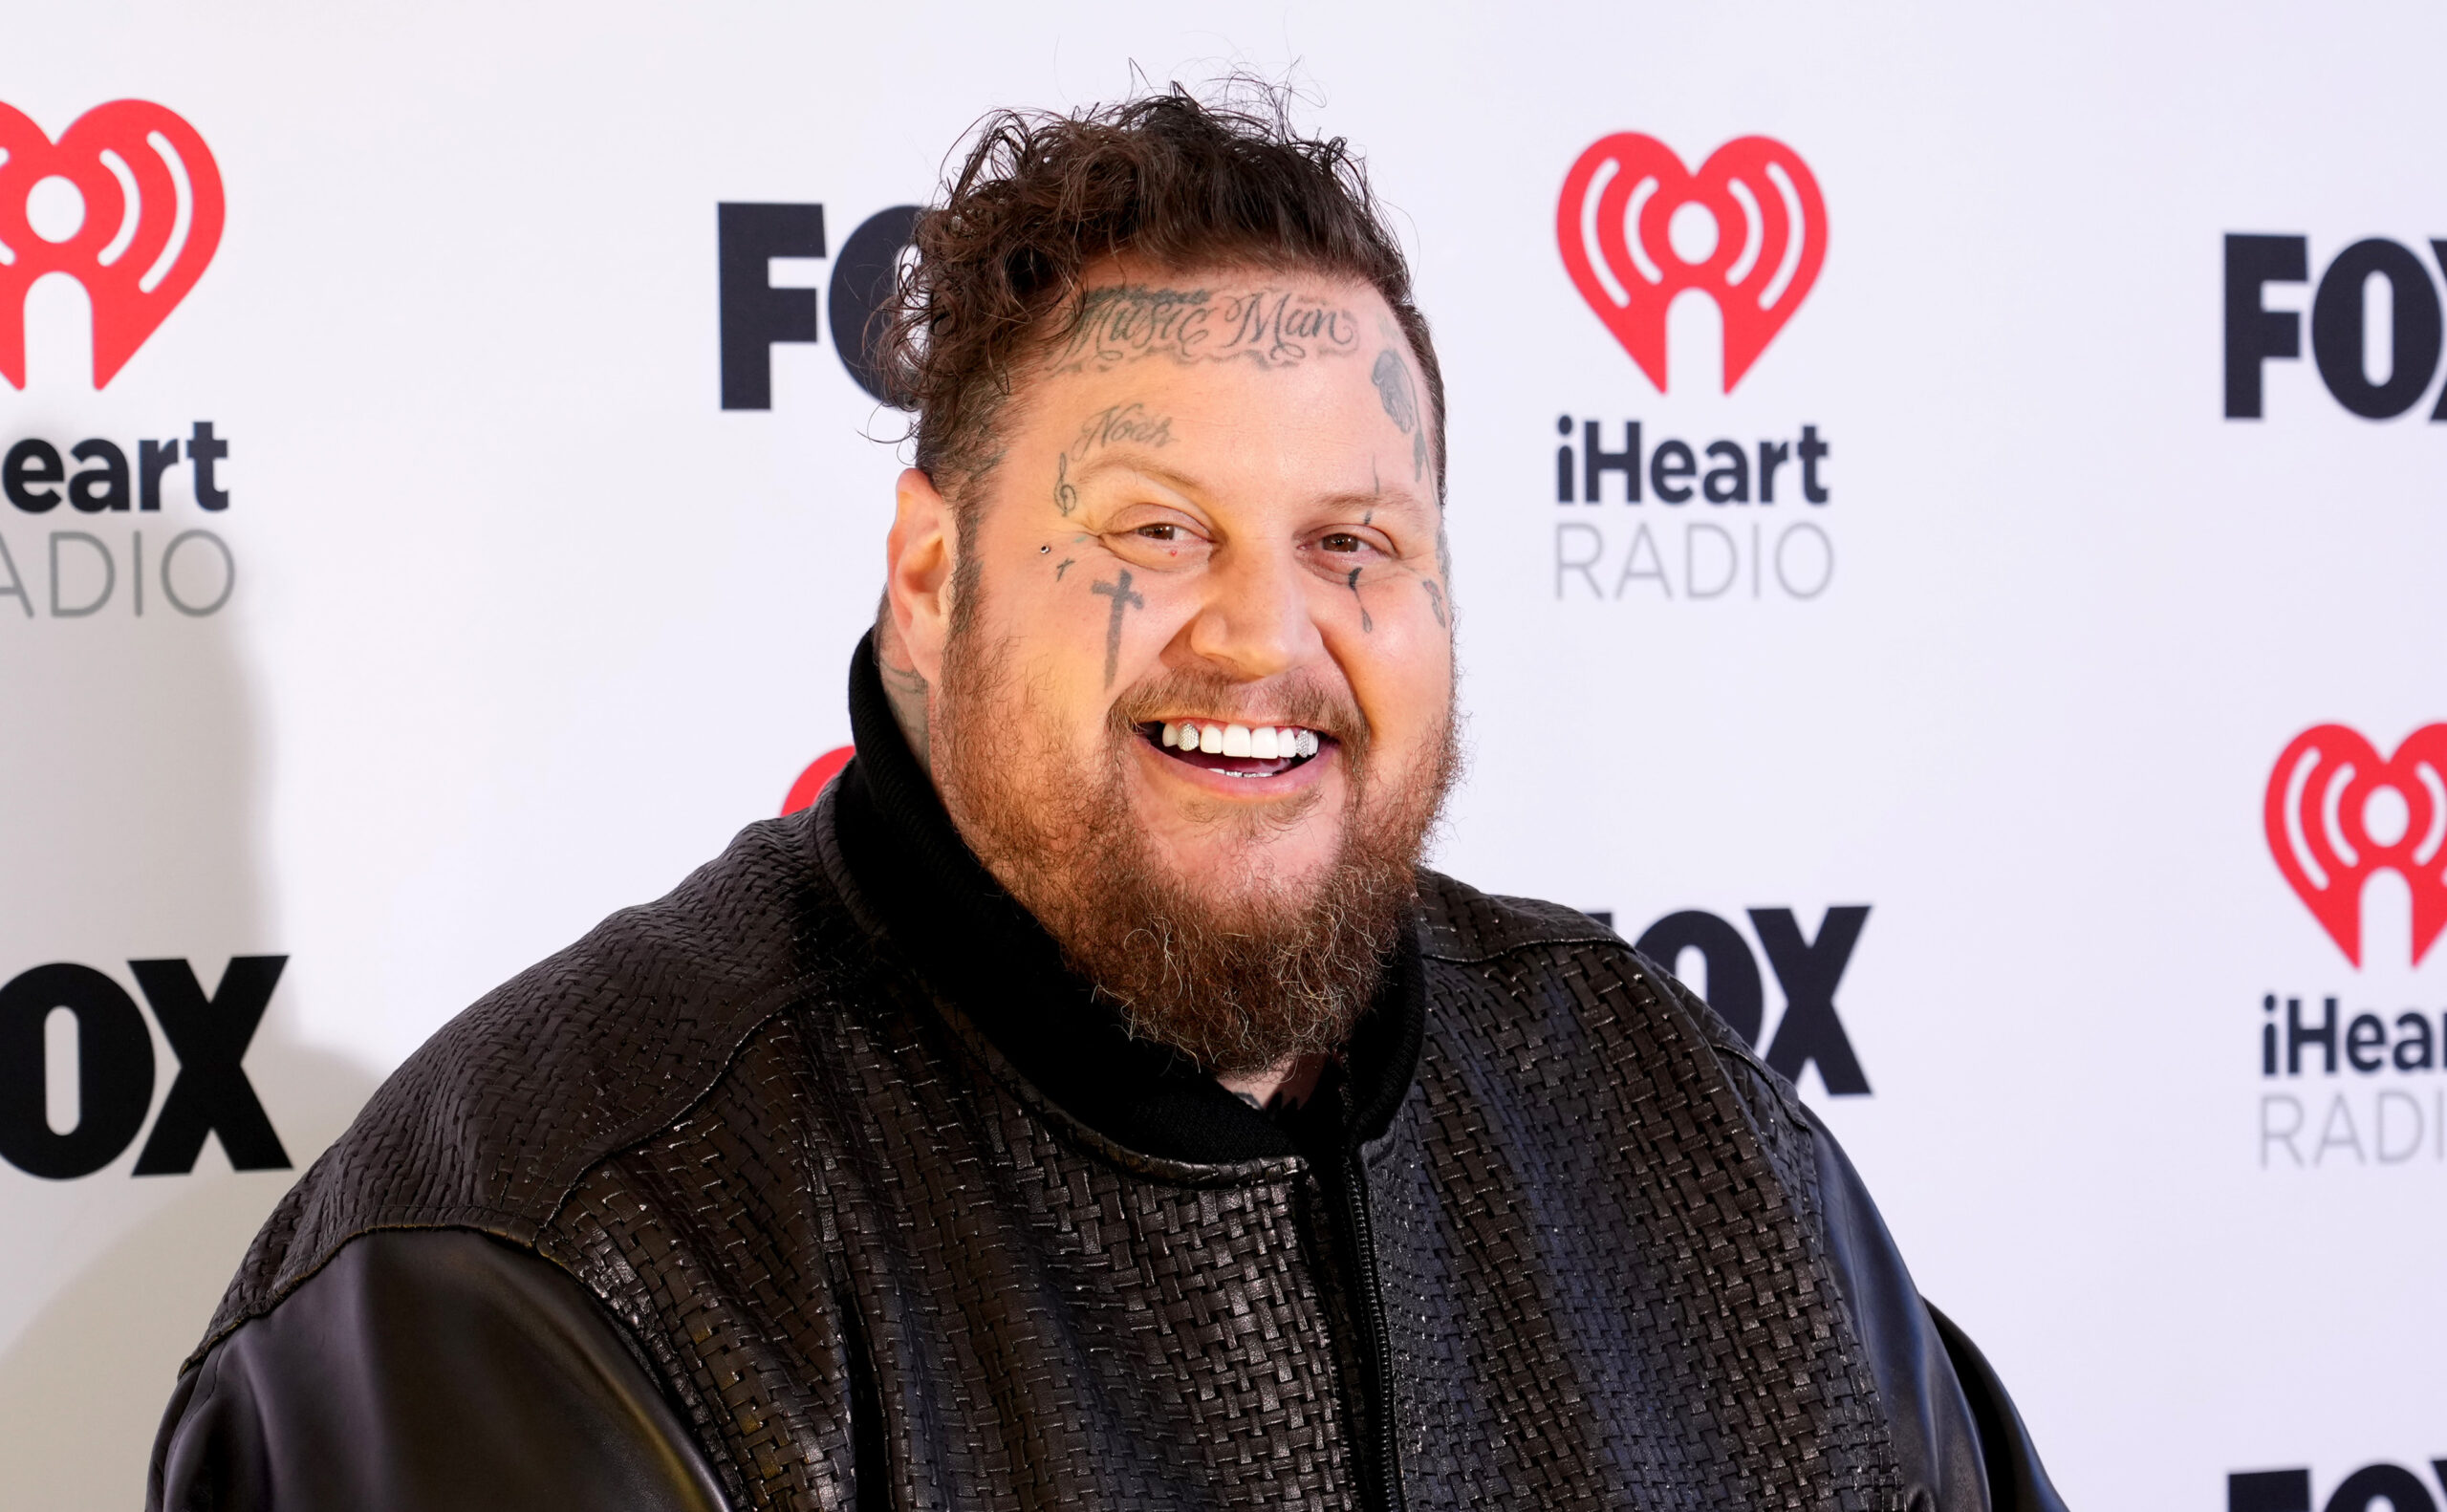 Country music artist Jelly Roll shared that he shed approximately 70 pounds while preparing for a 5K race, expressing how great he now feels